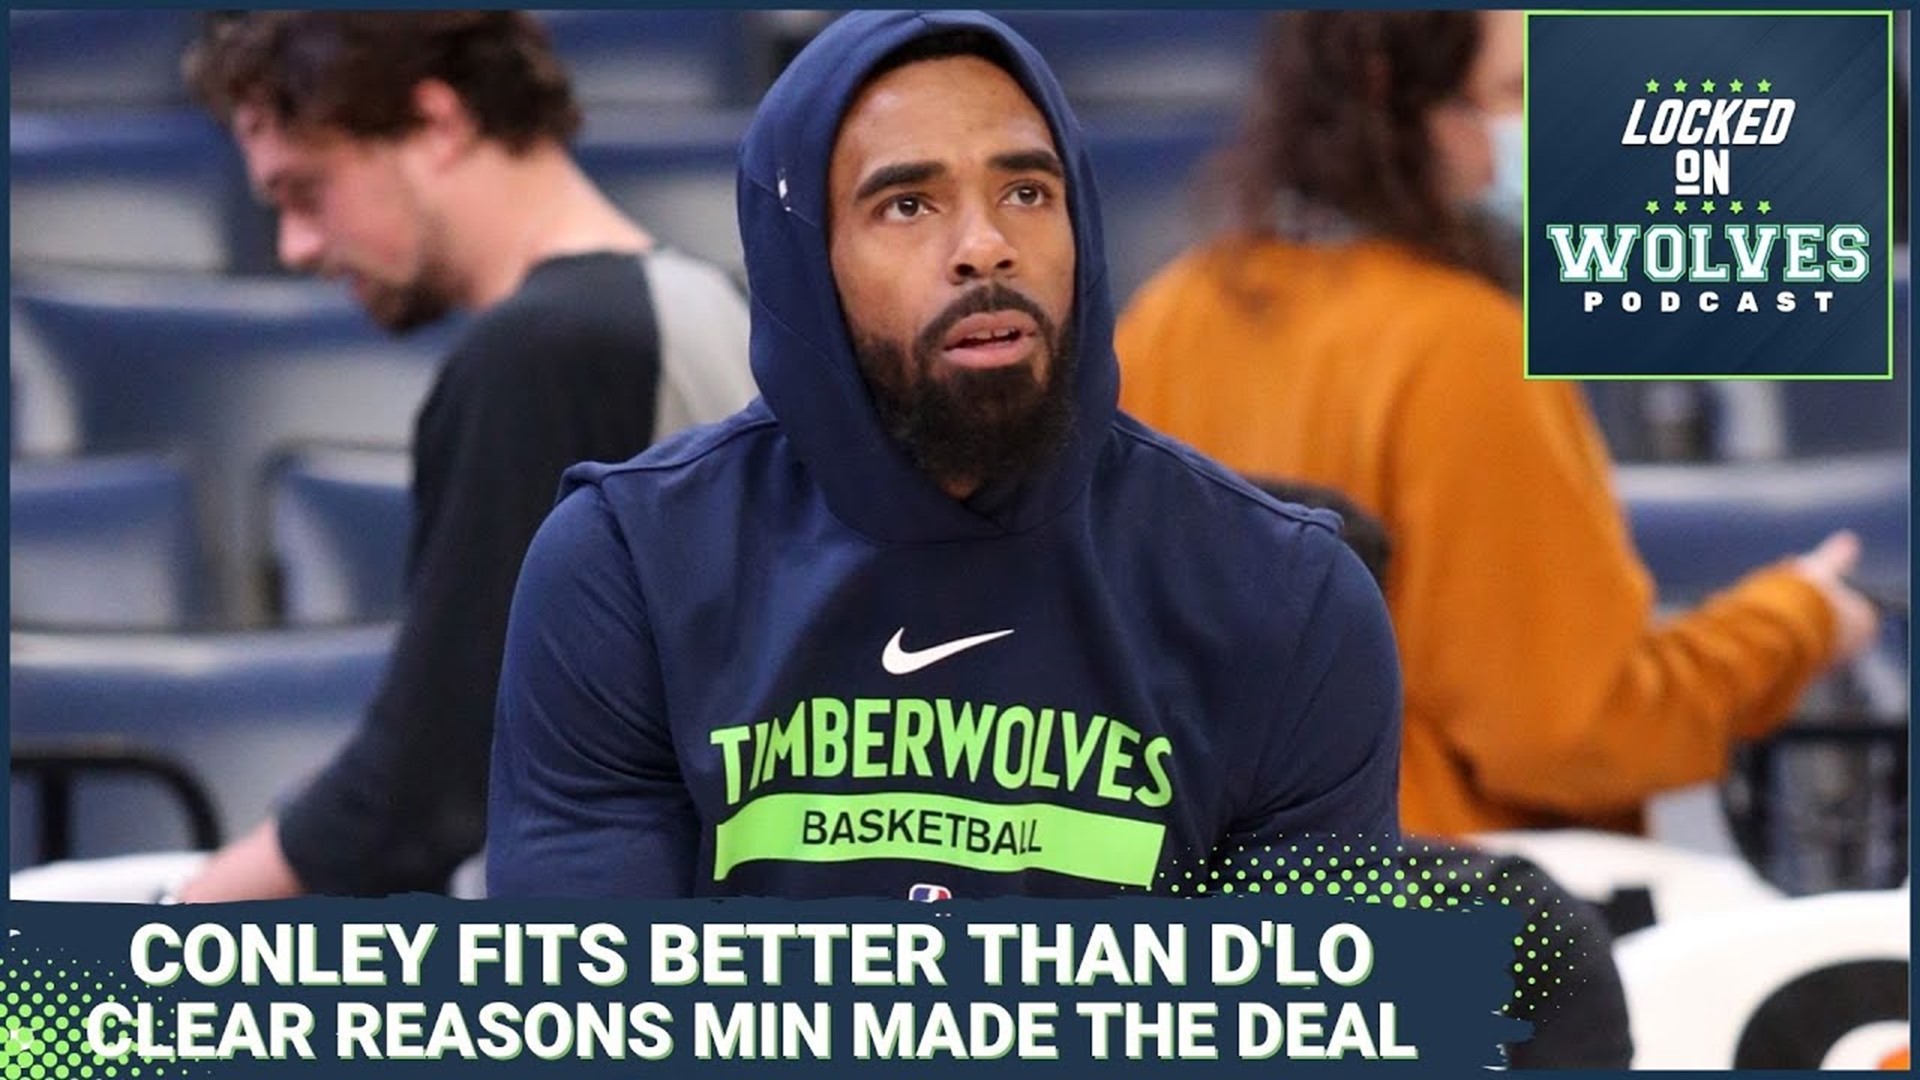 One clear reason why the Timberwolves wanted Mike Conley instead of D'Angelo Russell